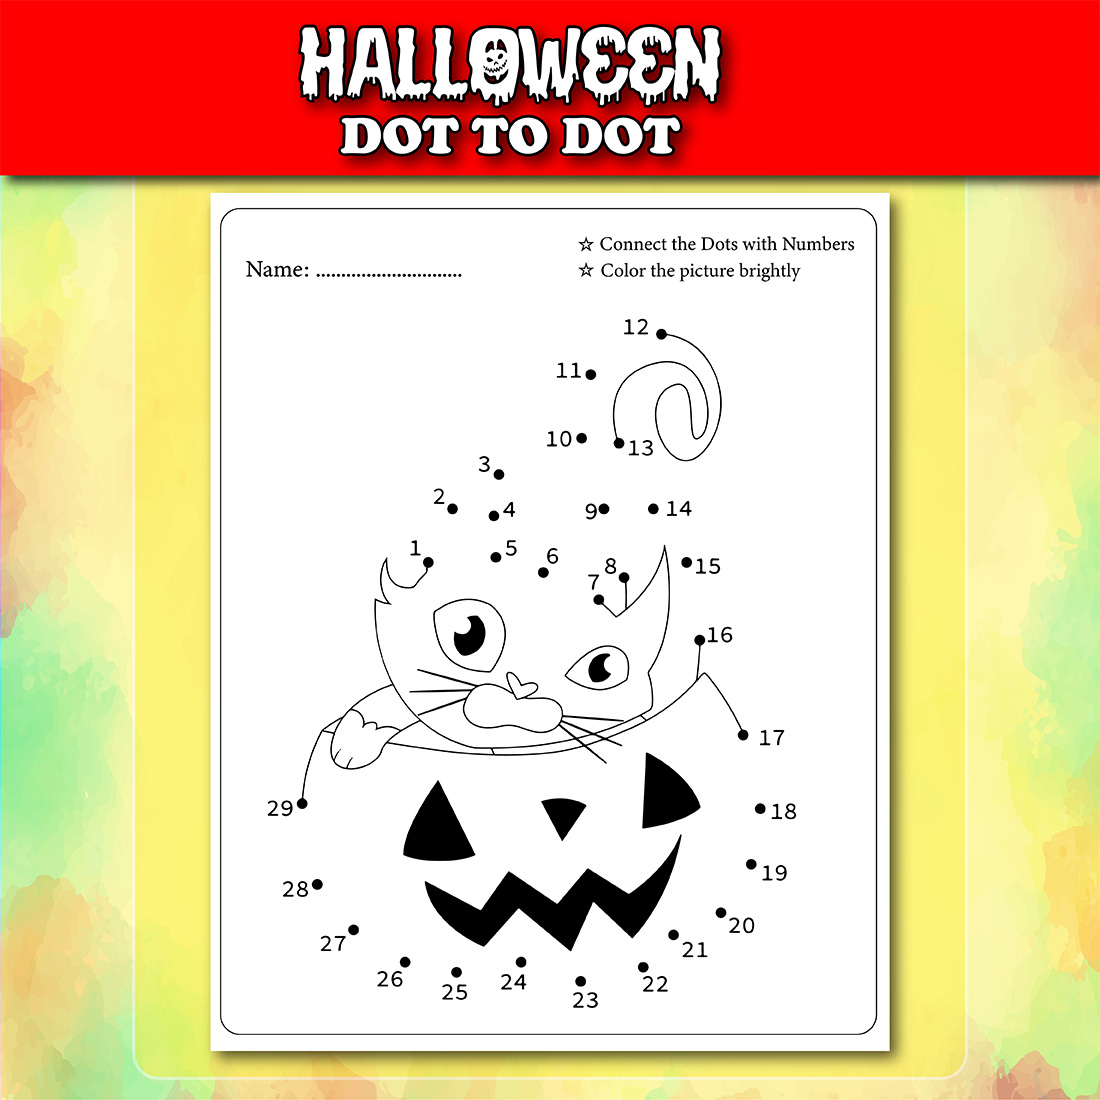 Halloween Dot To Dot For Kids Cat With Pumpkin Example.